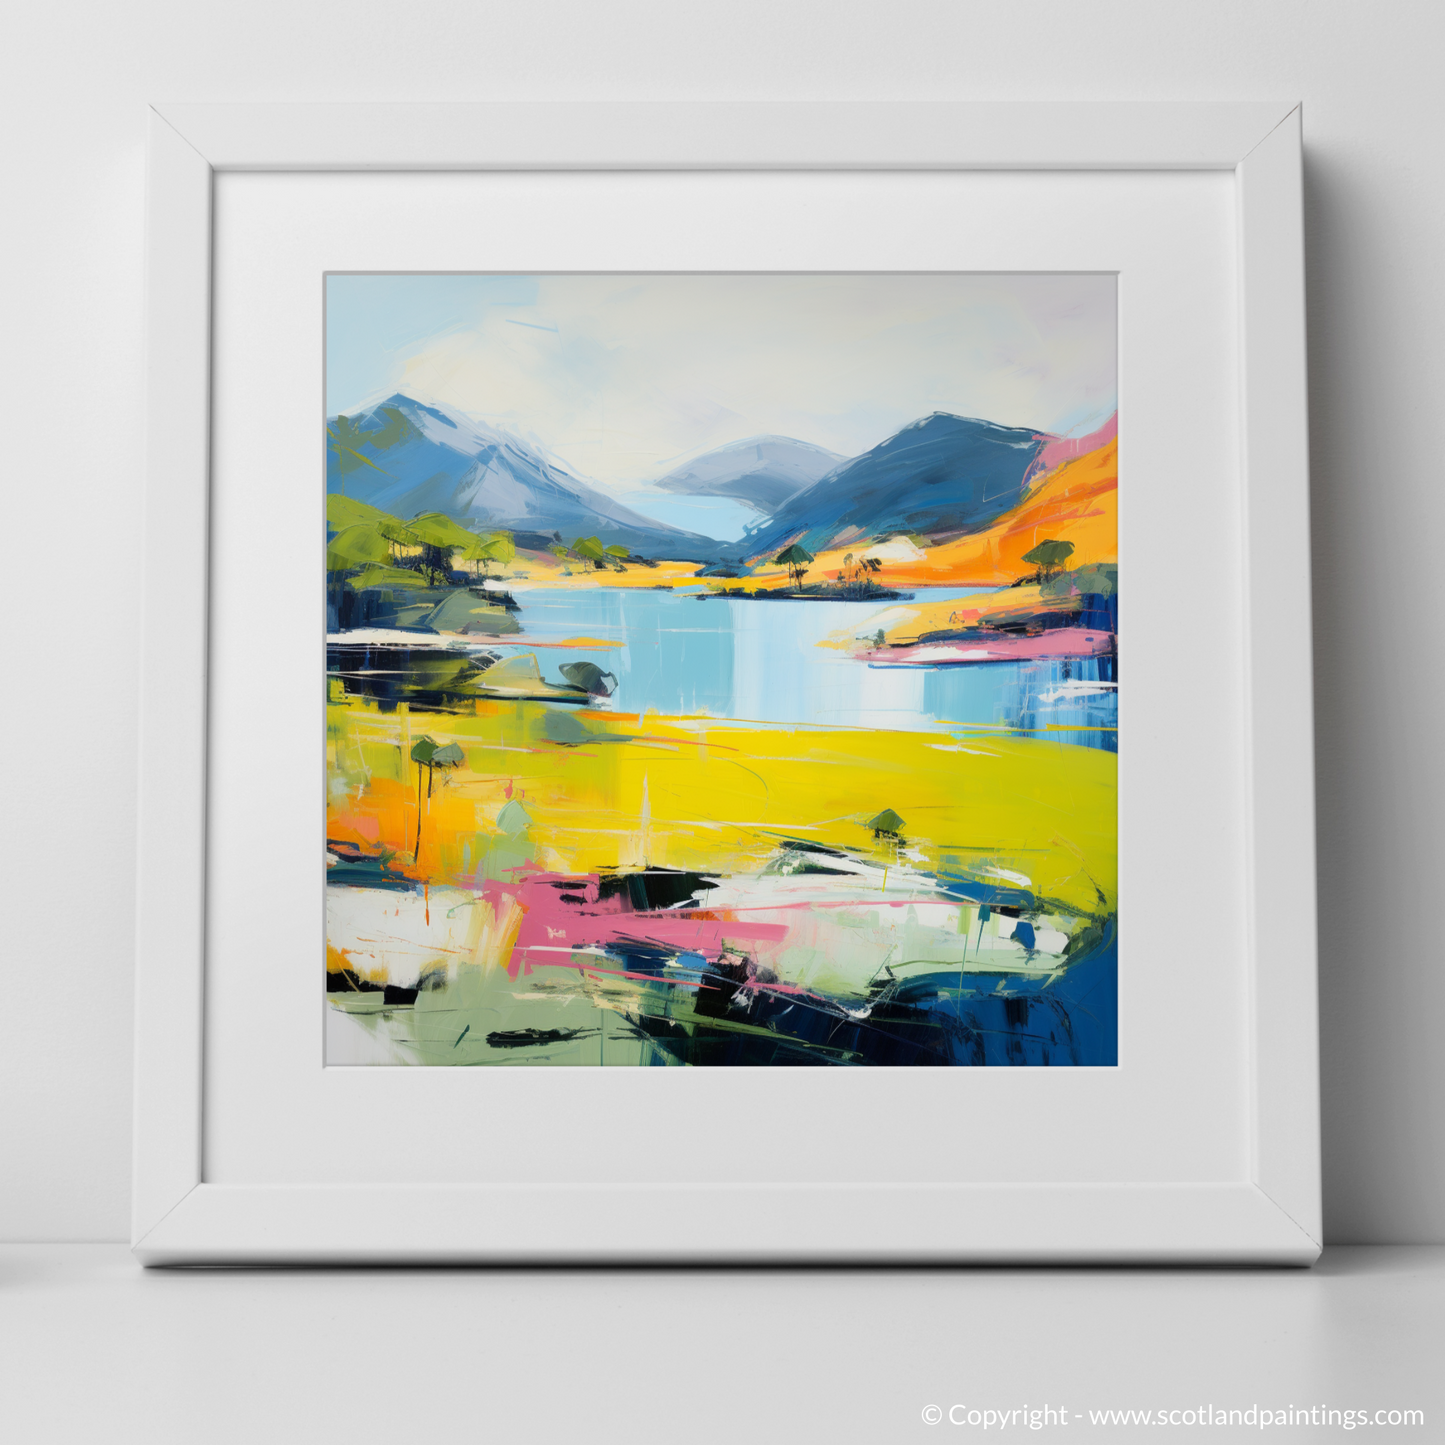 Art Print of Loch Morar, Highlands in summer with a white frame